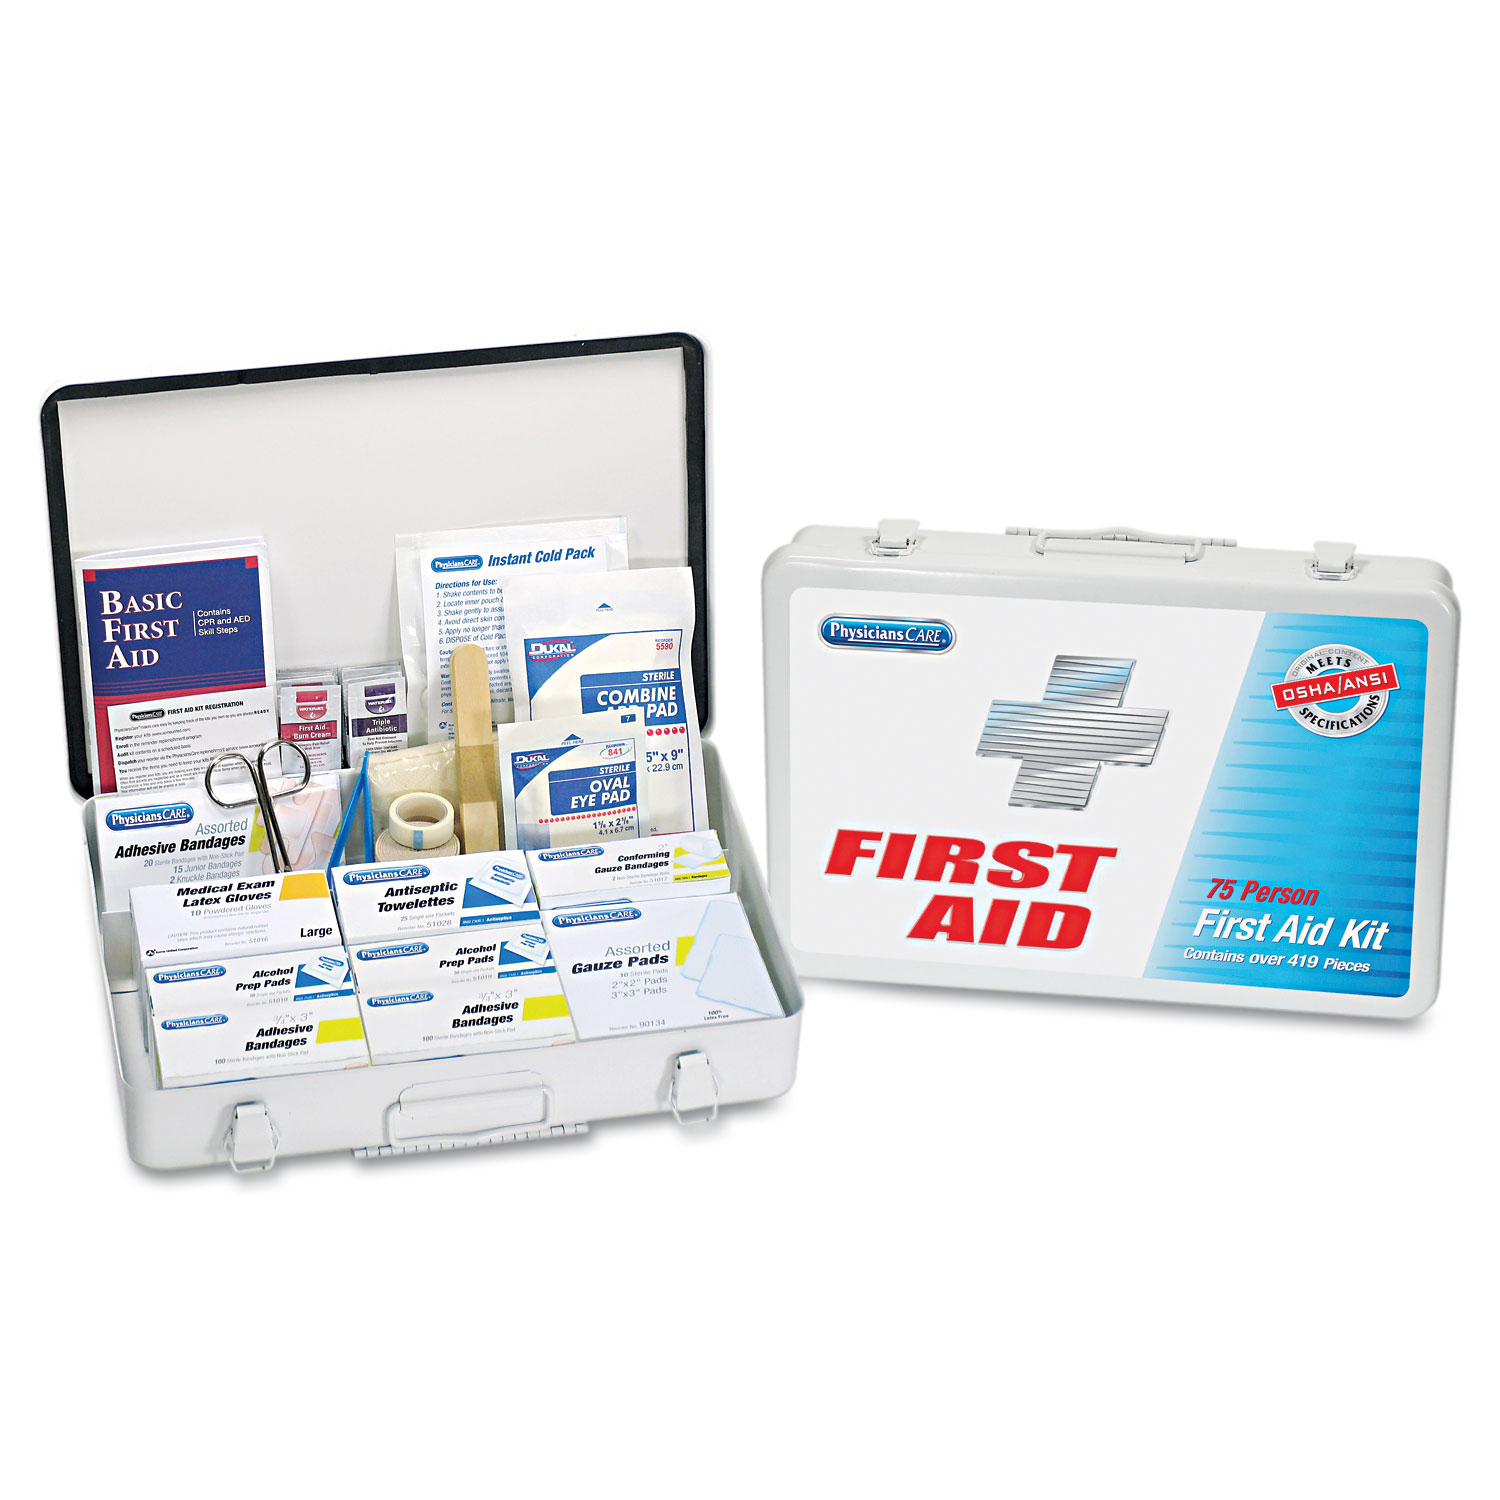 First Aid Kit for up to 75 People, Metal, 419 Pieces/Kit